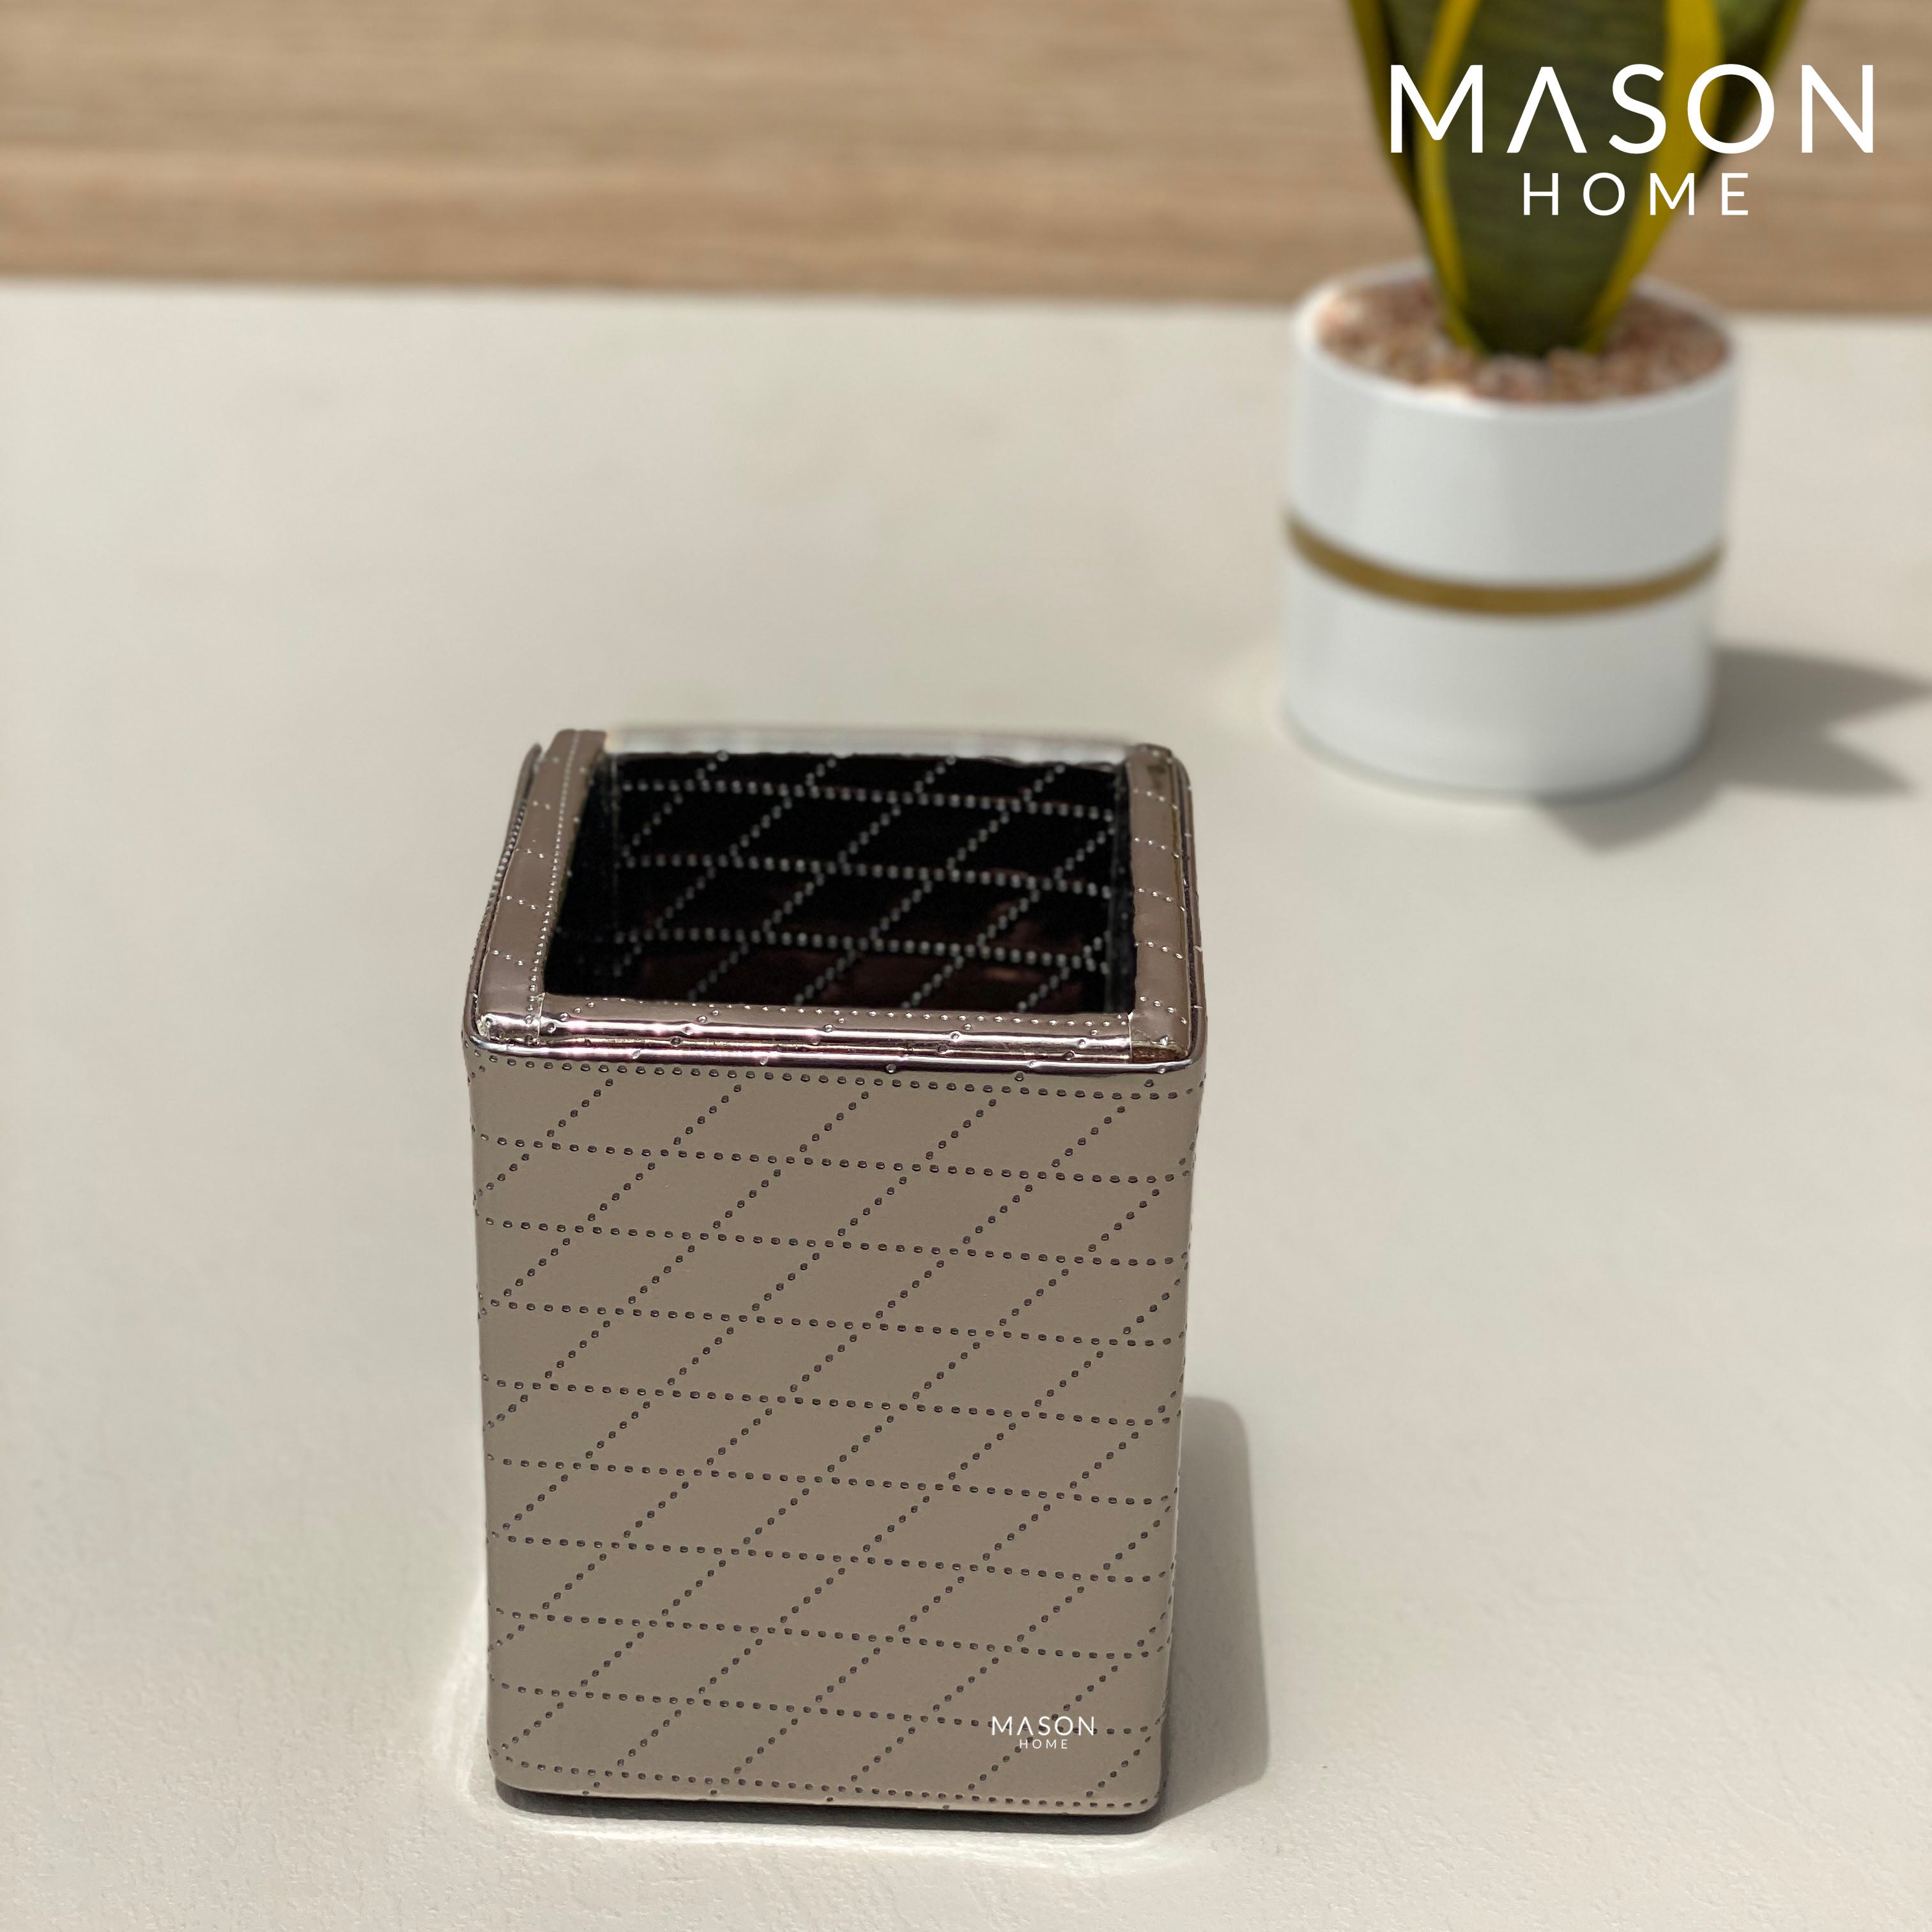 GROOMING STAND - Mason Home by Amarsons - Lifestyle &amp; Decor